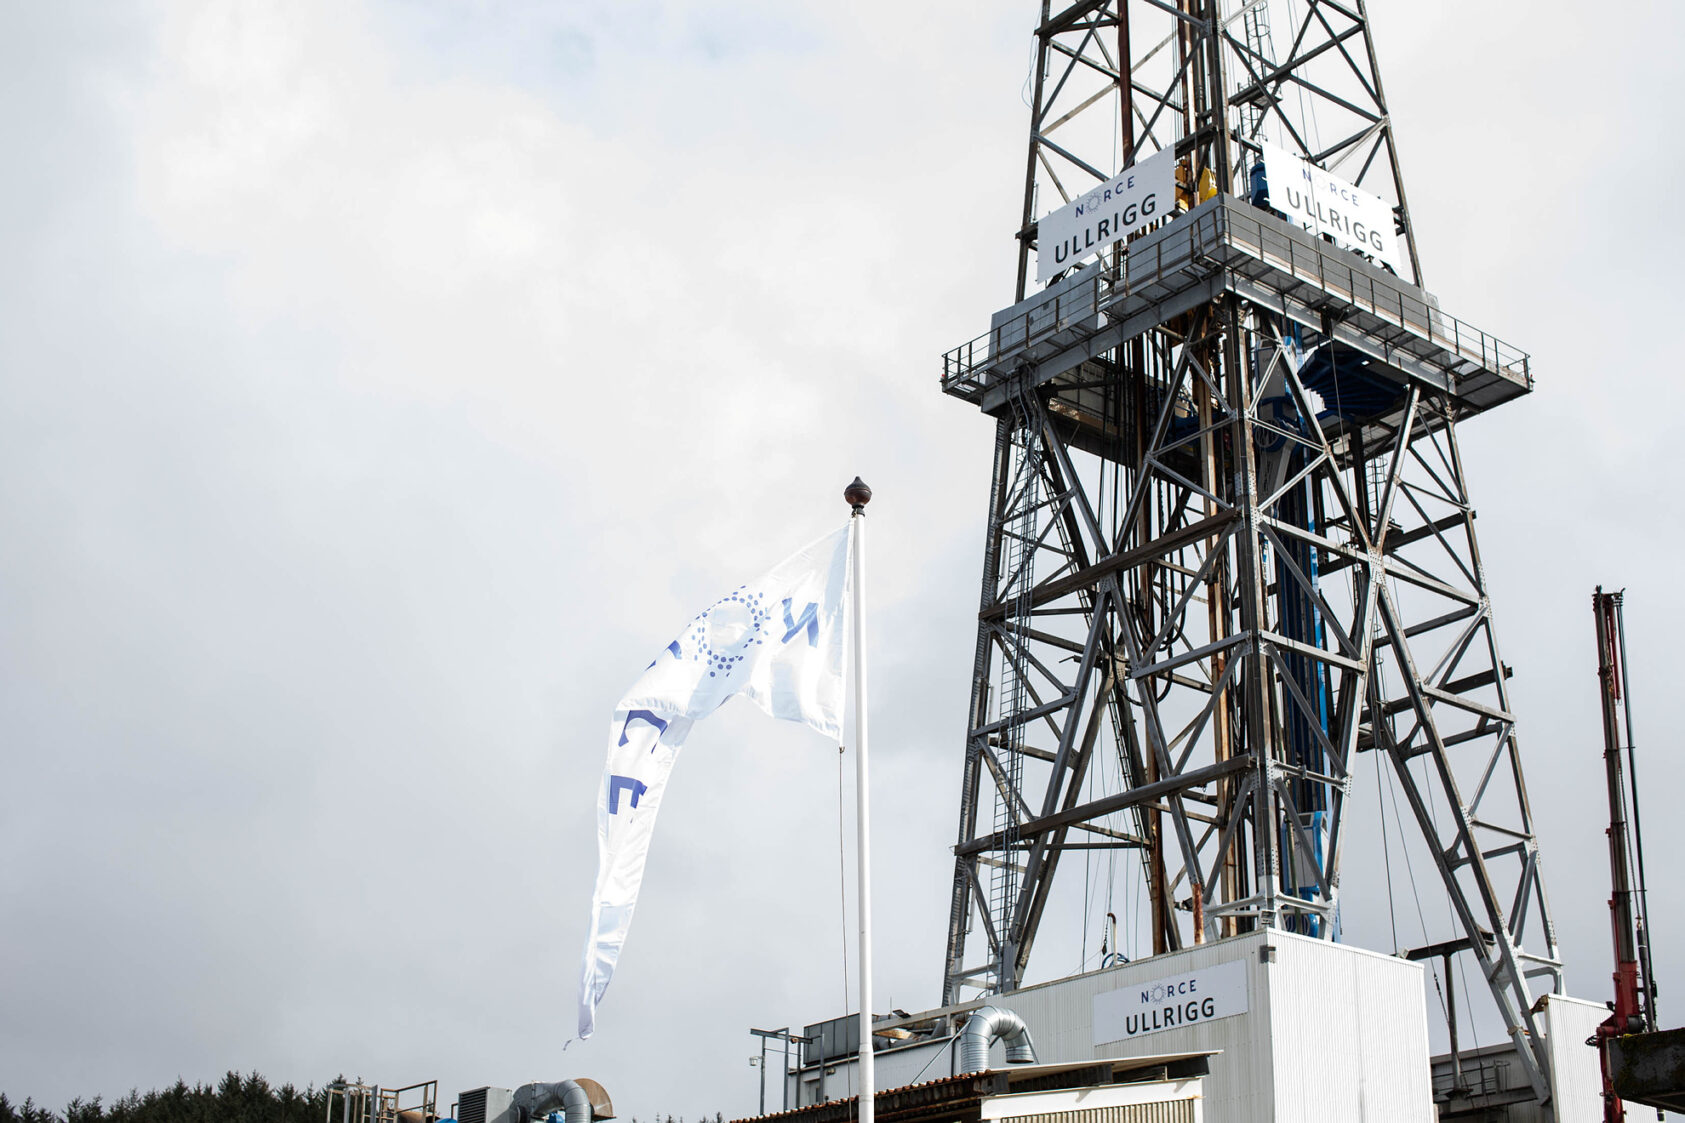 Rune Rolvsjord, NORCE, NORCE's full-scale drilling rig, Ullrigg, contributes to offshore competence and technology development., Ullrigg, <p>Rune Rolvsjord</p>, 